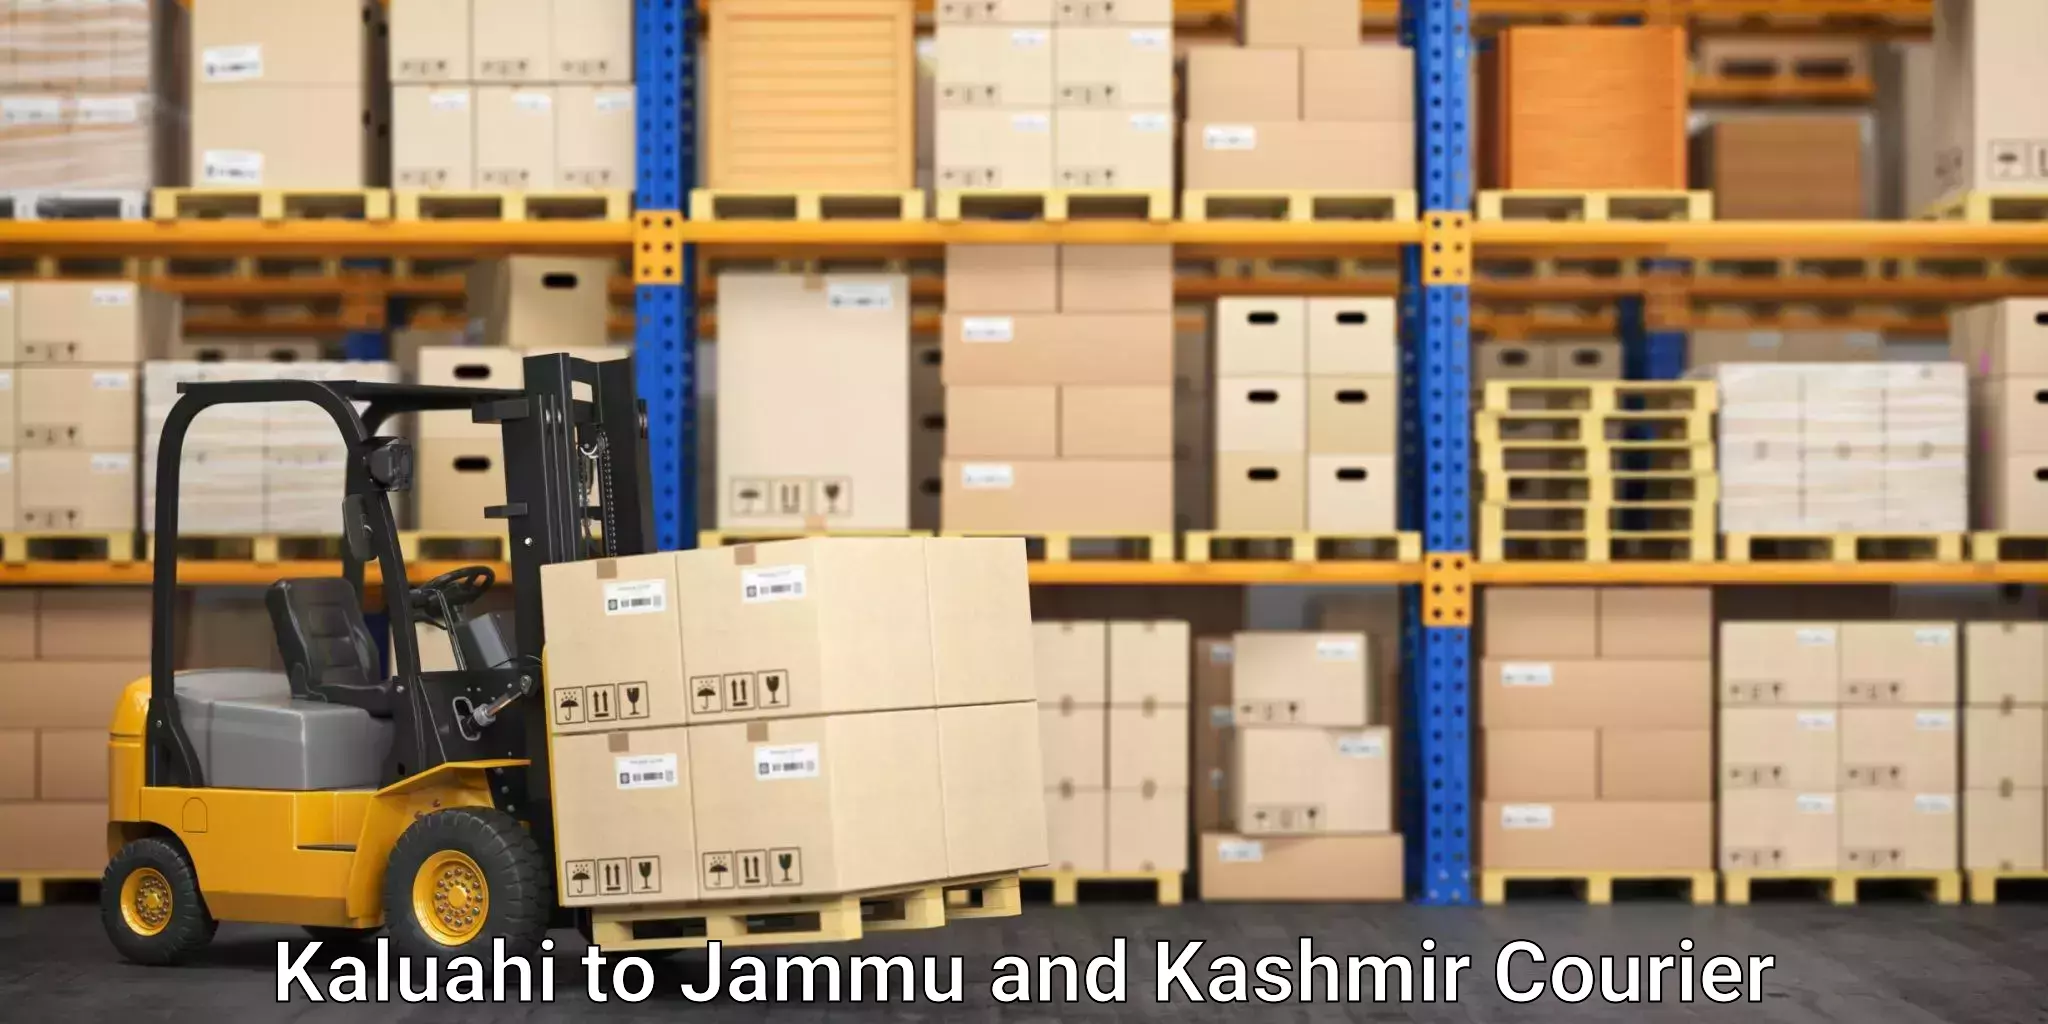 Professional home movers in Kaluahi to Jammu and Kashmir